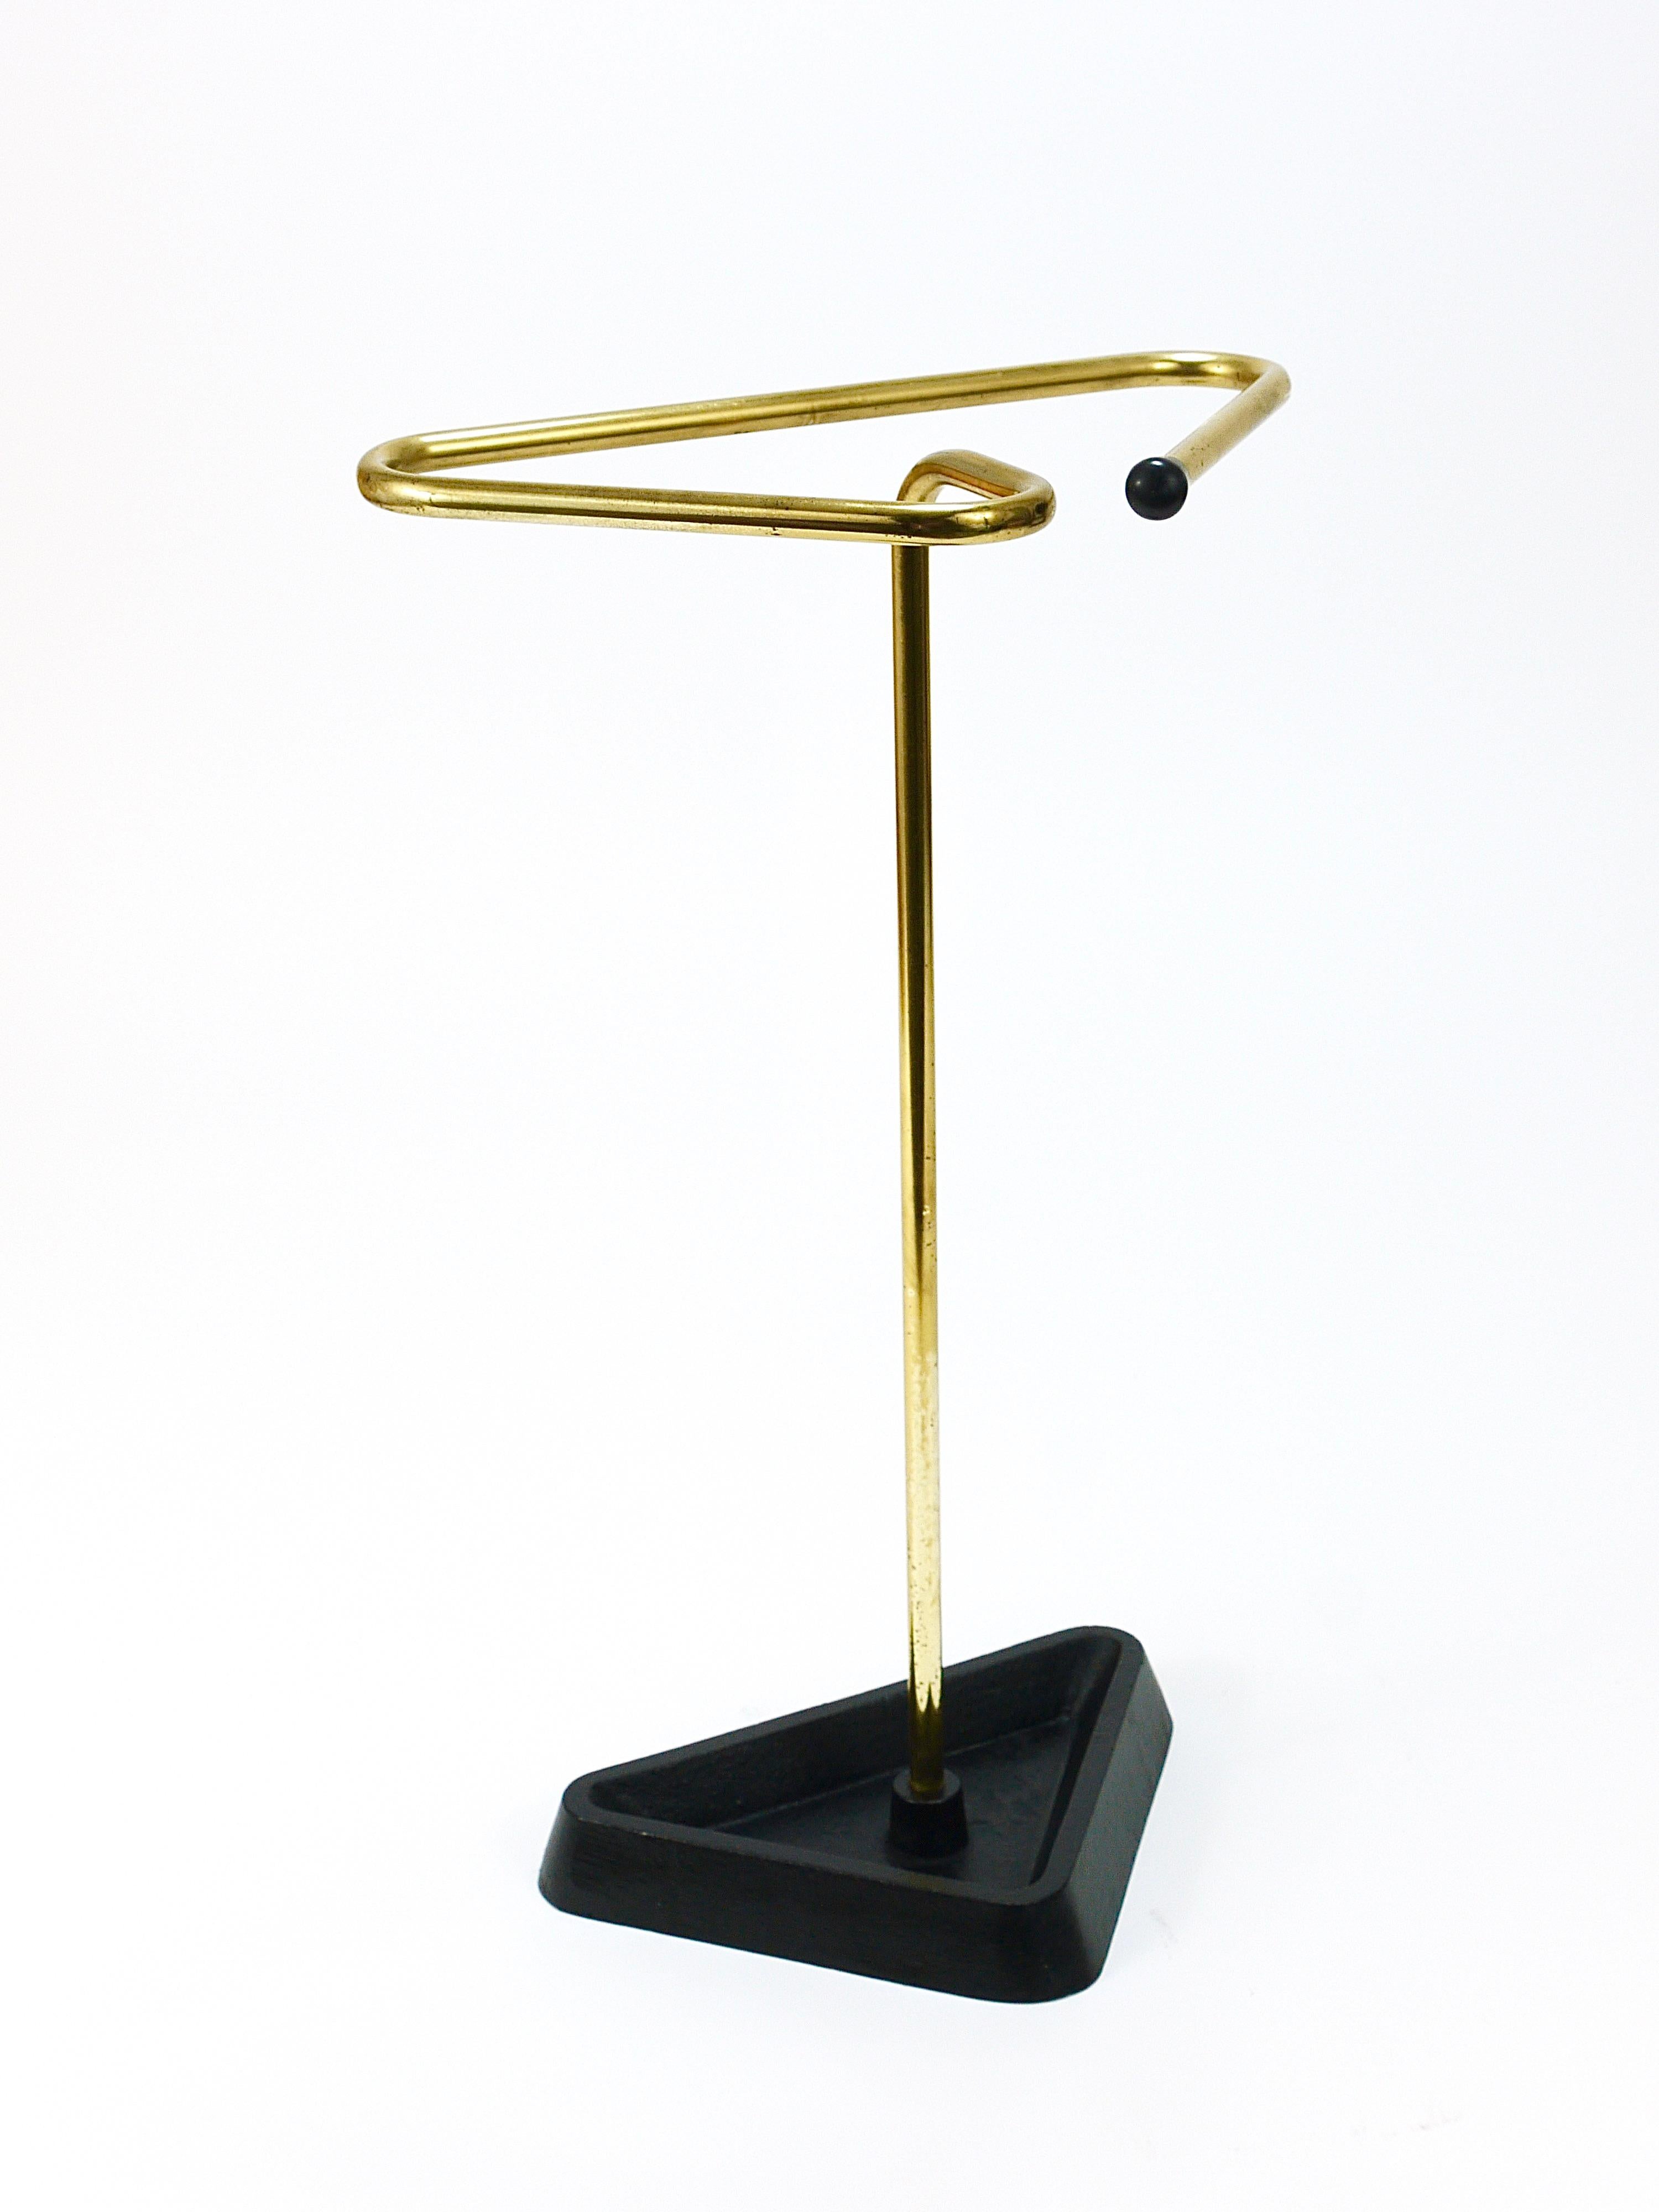 Midcentury Modern Triangle Umbrella Stand, Brass & Cast Iron, Austria, 1950s In Good Condition For Sale In Vienna, AT